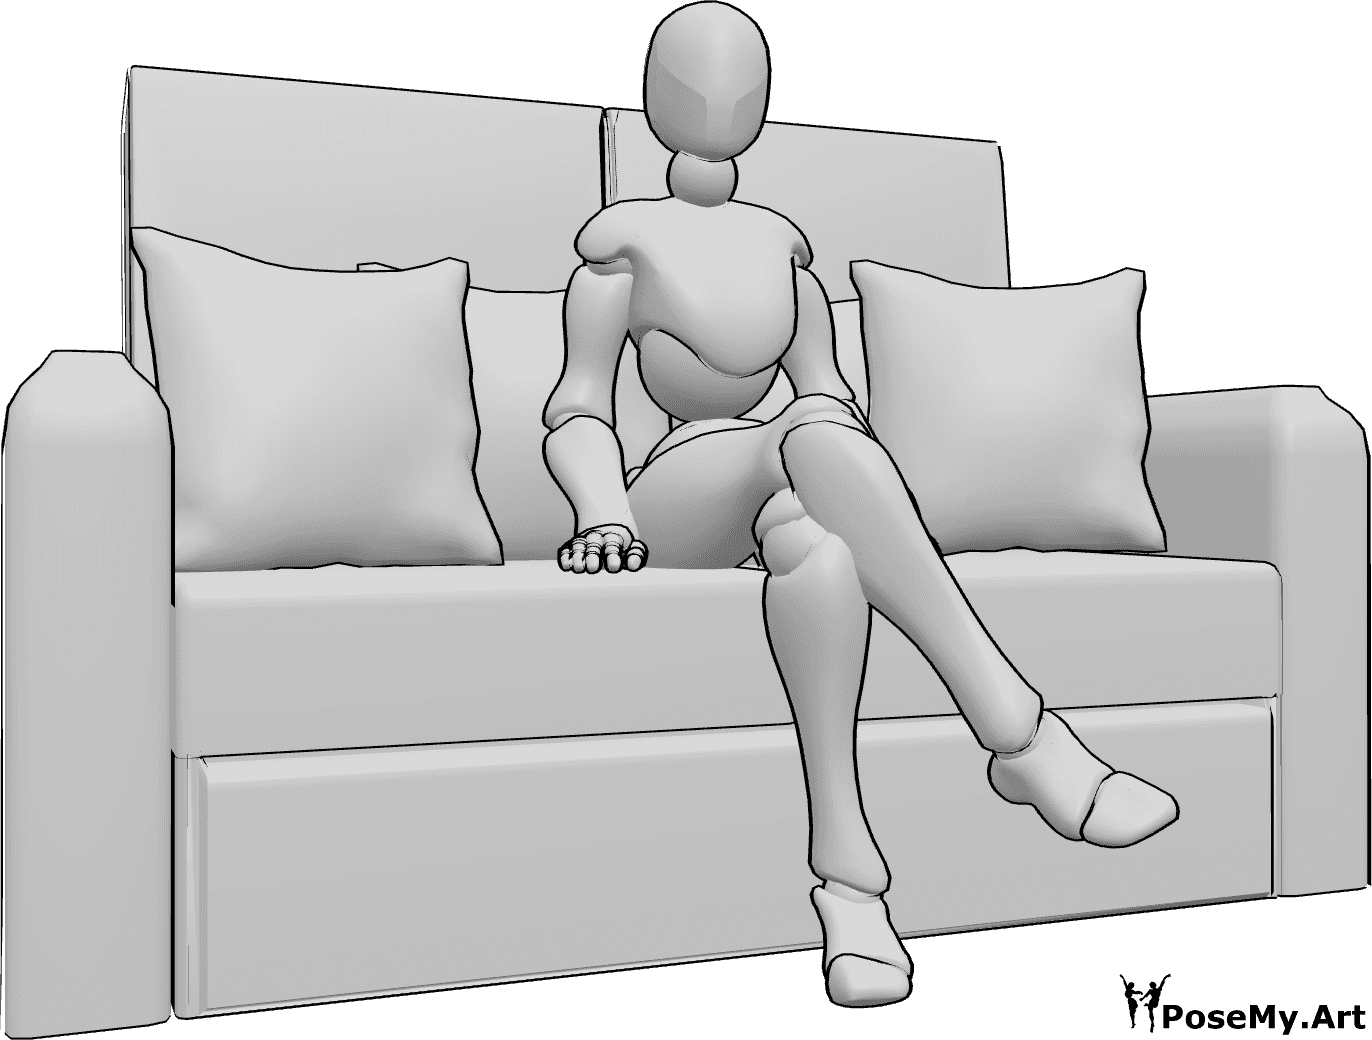 Pose Reference - Female casual sitting pose - Female is sitting casually with her legs crossed on the couch pose